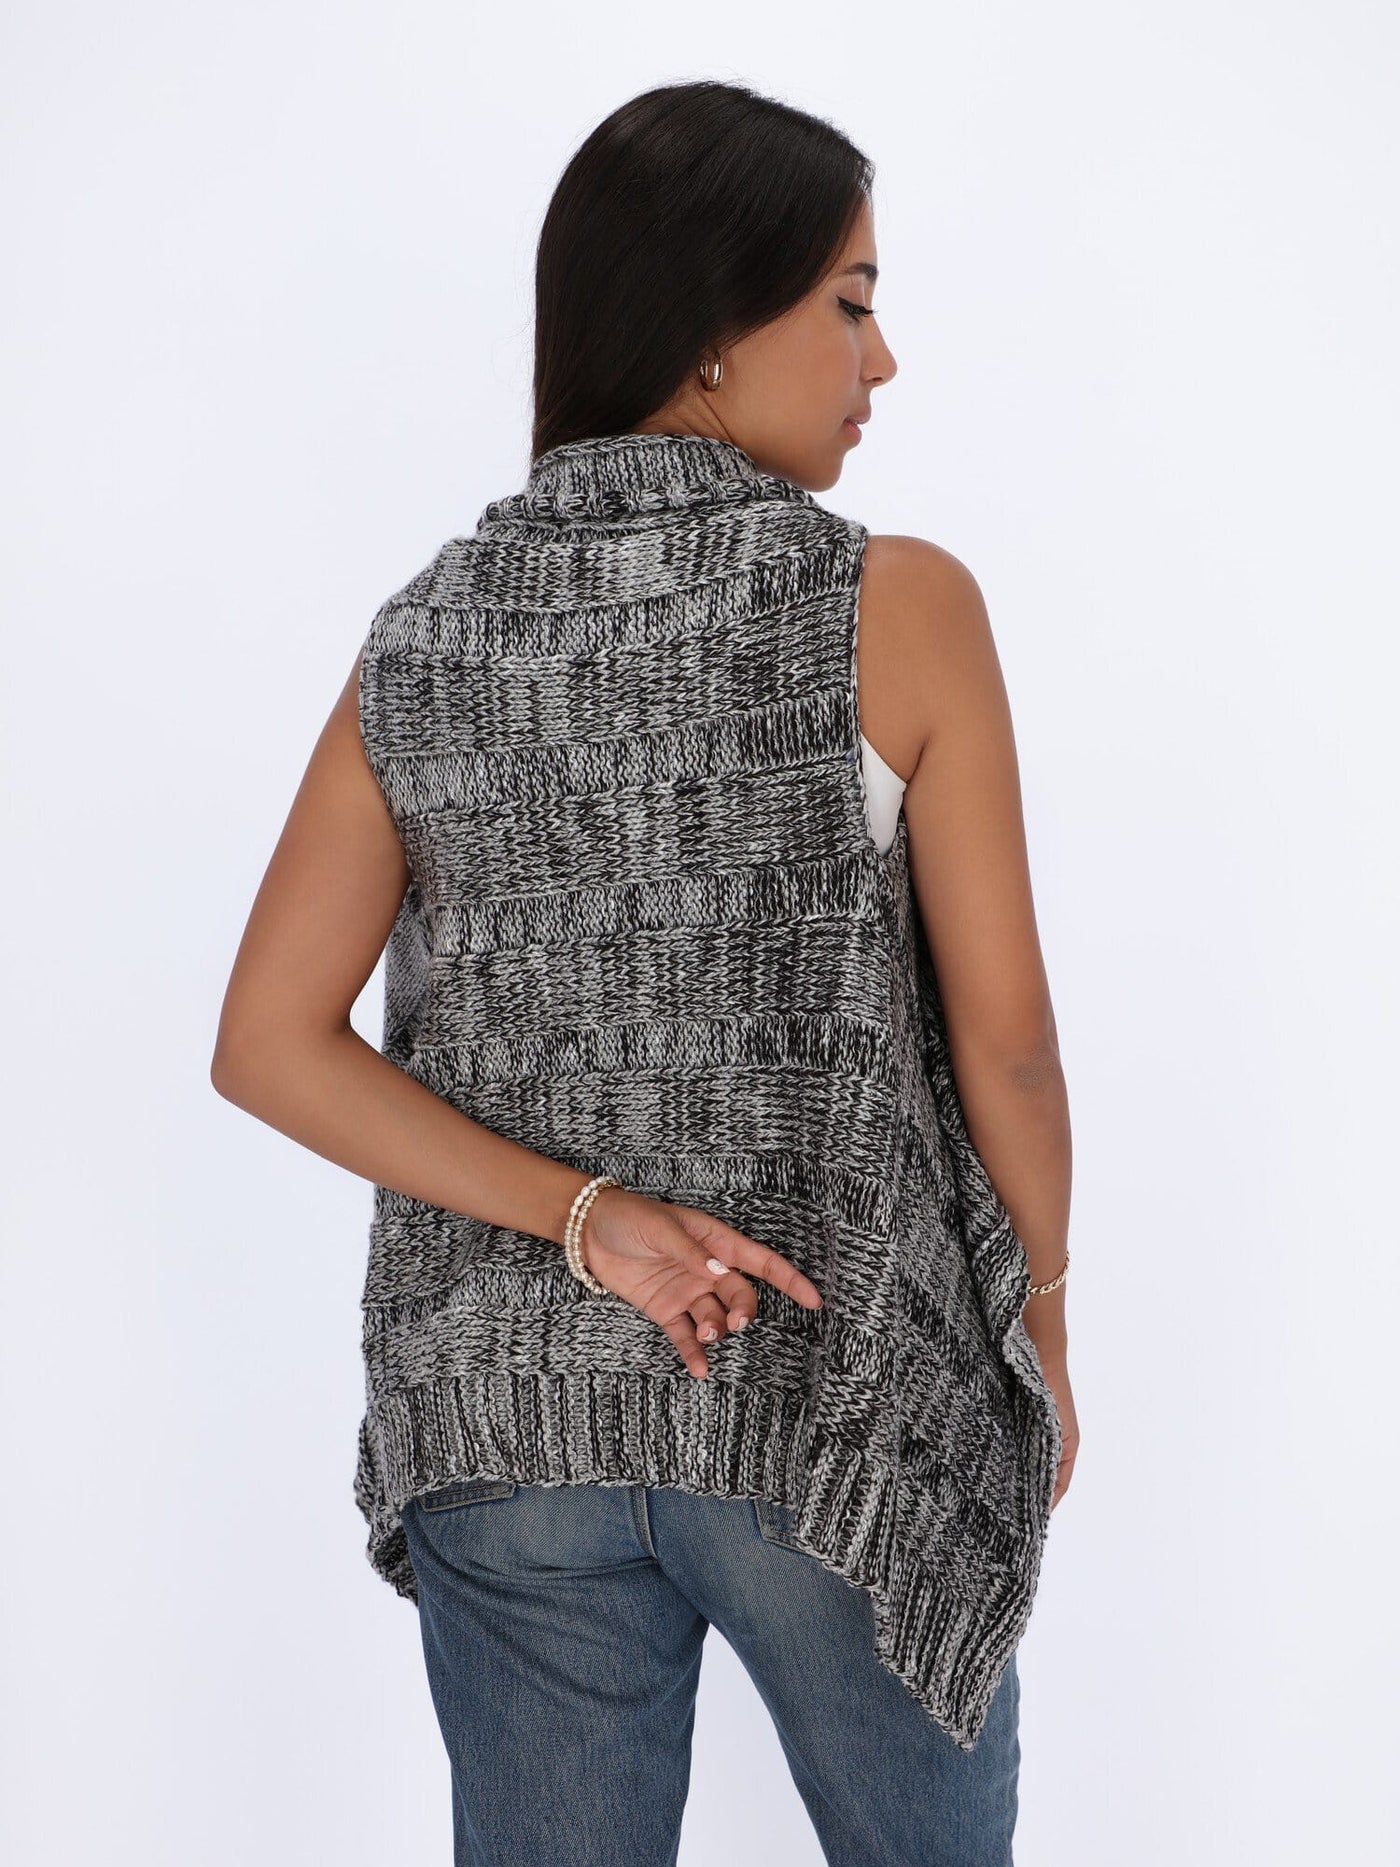 OR Knitwear Front Criss Cross Sleeveless Pullover